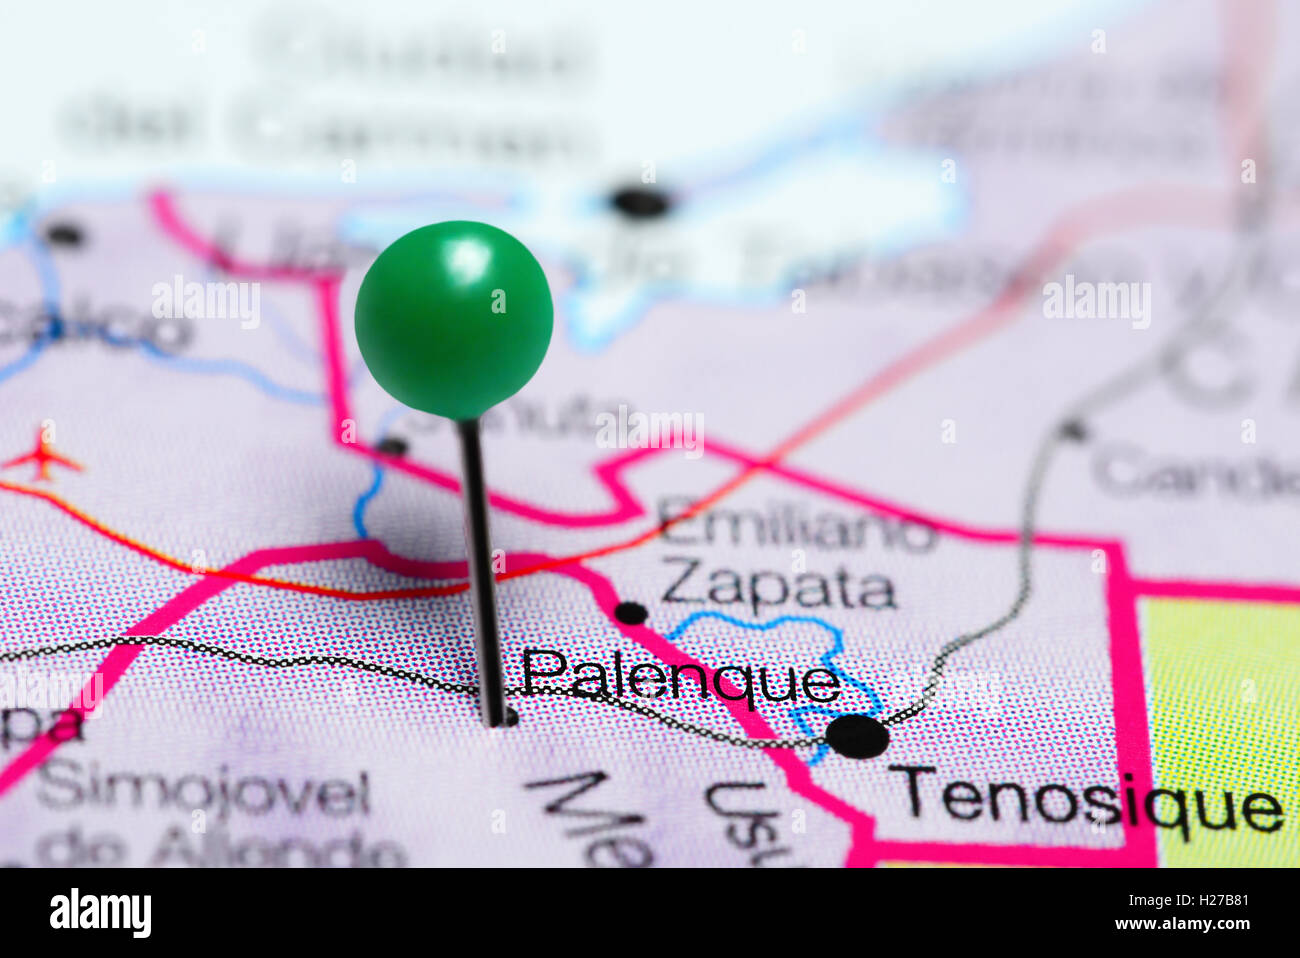 Palenque pinned on a map of Mexico Stock Photo